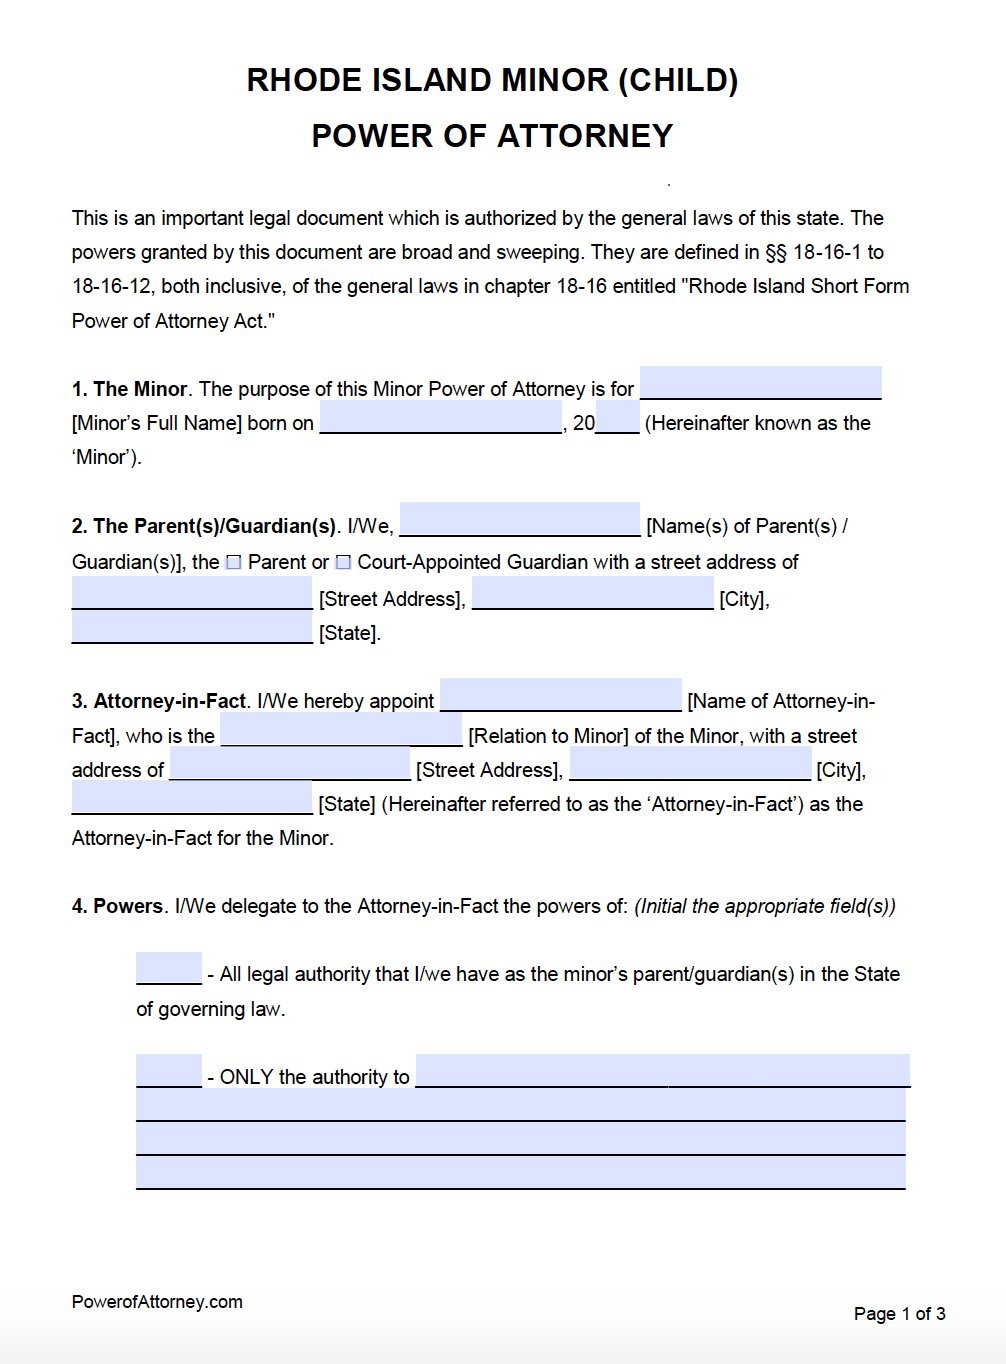 free-rhode-island-power-of-attorney-forms-pdf-templates